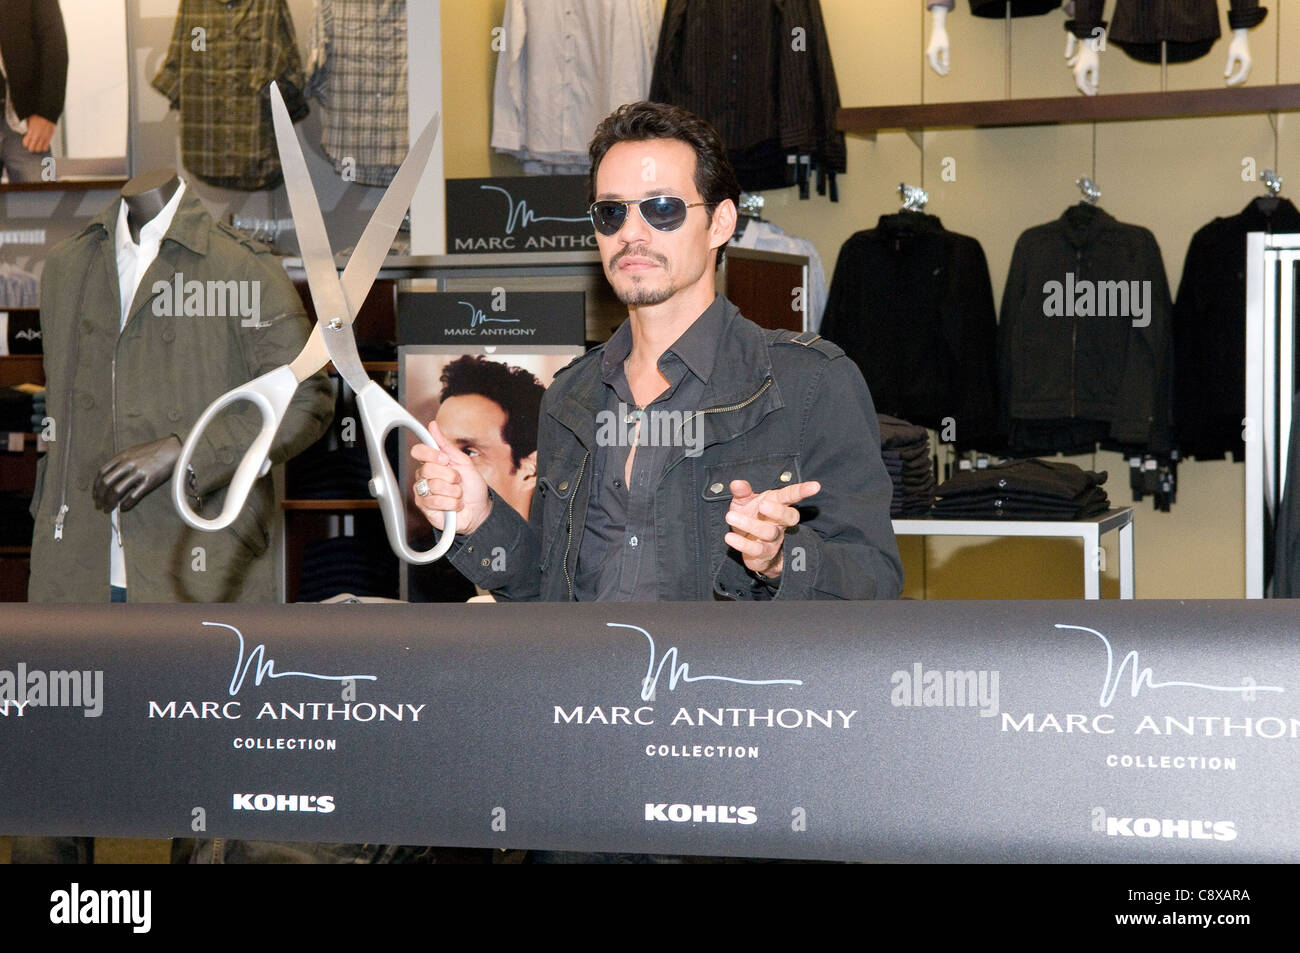 The Marc Anthony Clothing Collection Delivers Affordable Fashion for Men -  Mocha Man Style